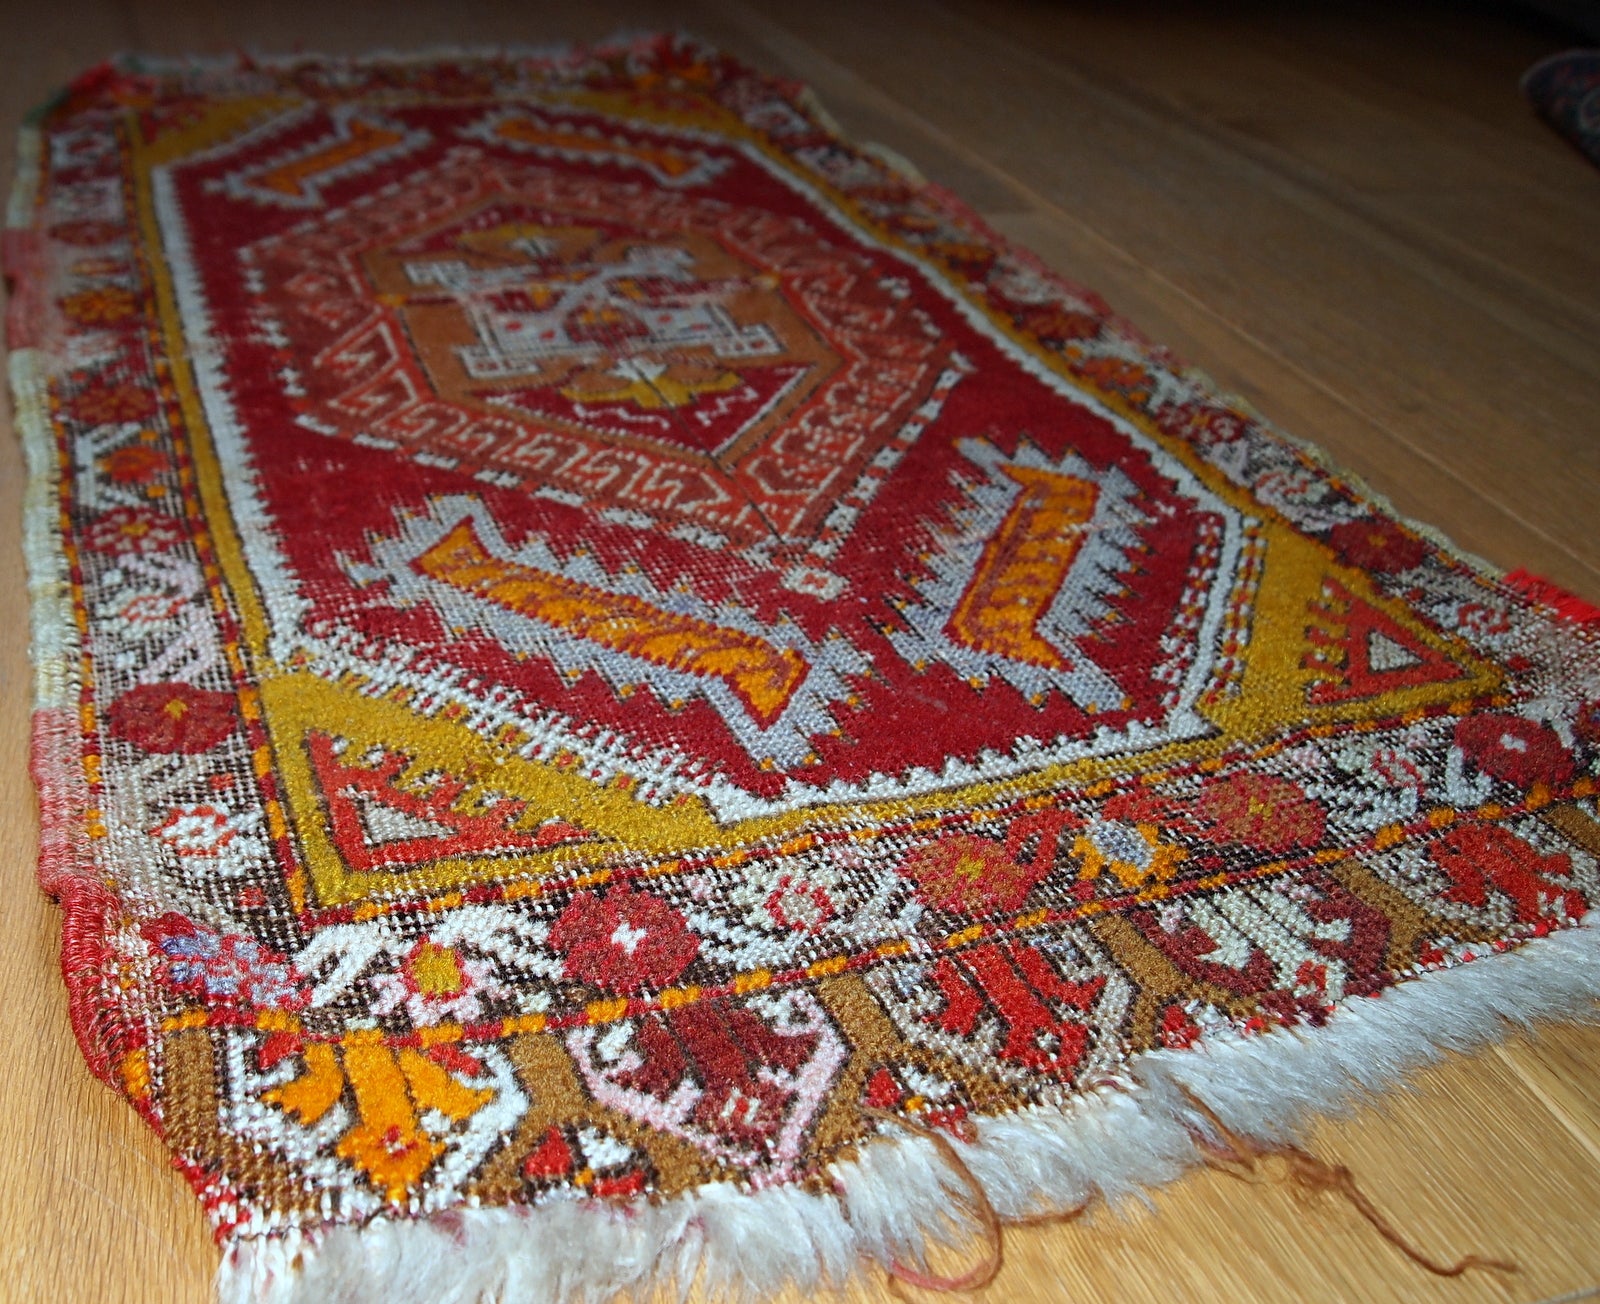 Antique Turkish Yastik rug in distressed condition. The rug made in red color with some accents of gold, orange and olive brown shades. 